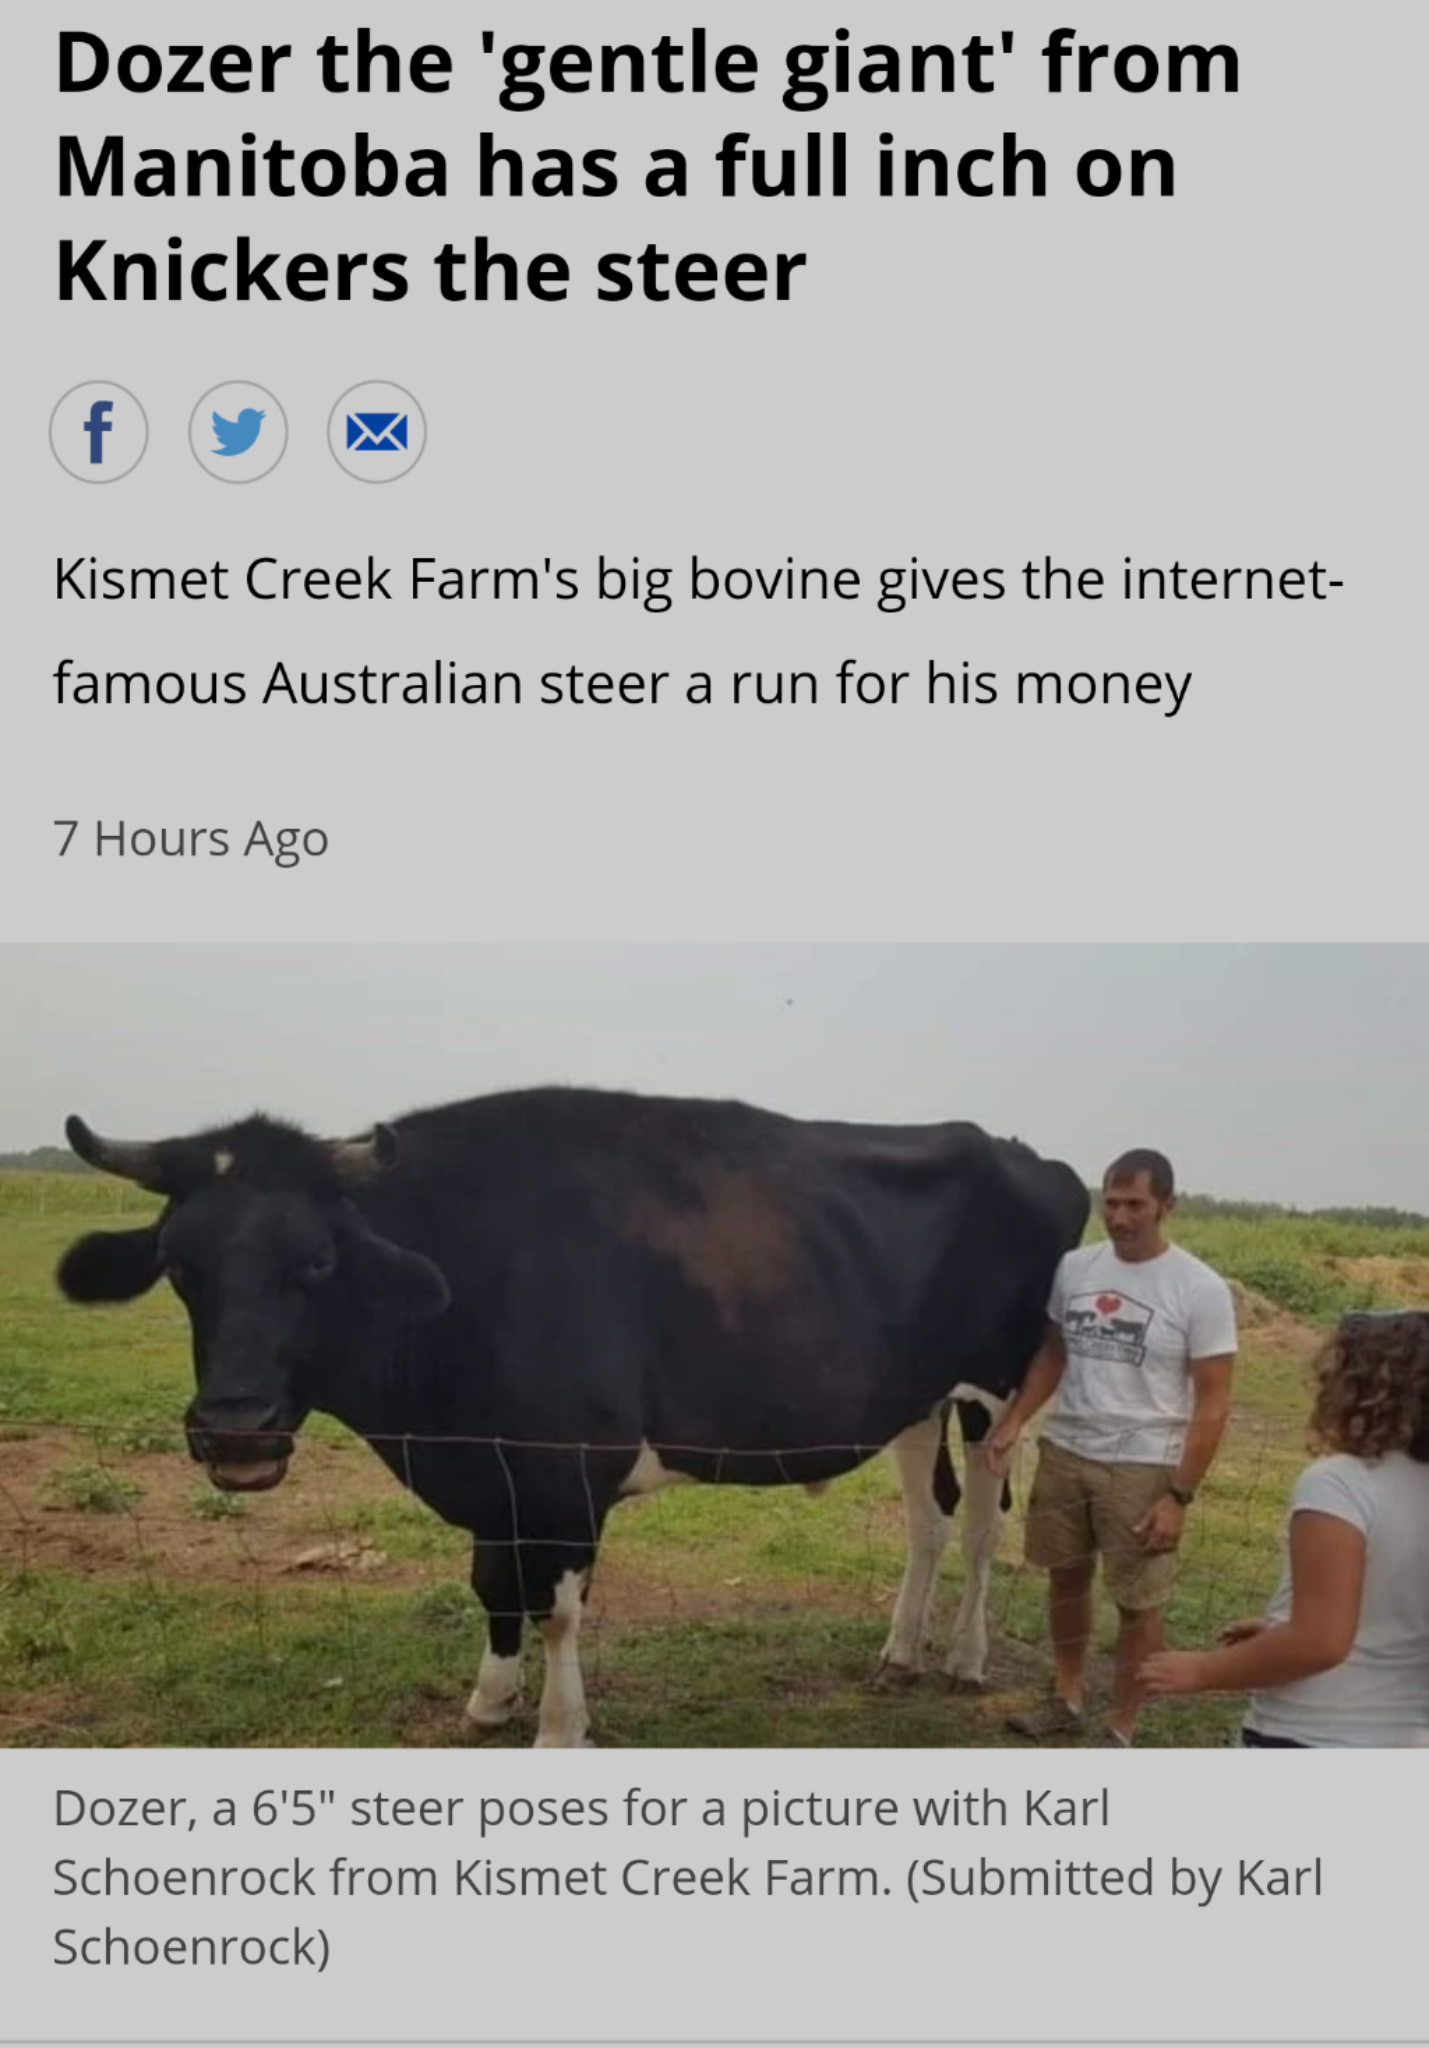 meme dozer the cow - Dozer the 'gentle giant' from Manitoba has a full inch on Knickers the steer fy Kismet Creek Farm's big bovine gives the internet famous Australian steer a run for his money 7 Hours Ago Dozer, a 6'5" steer poses for a picture with Kar